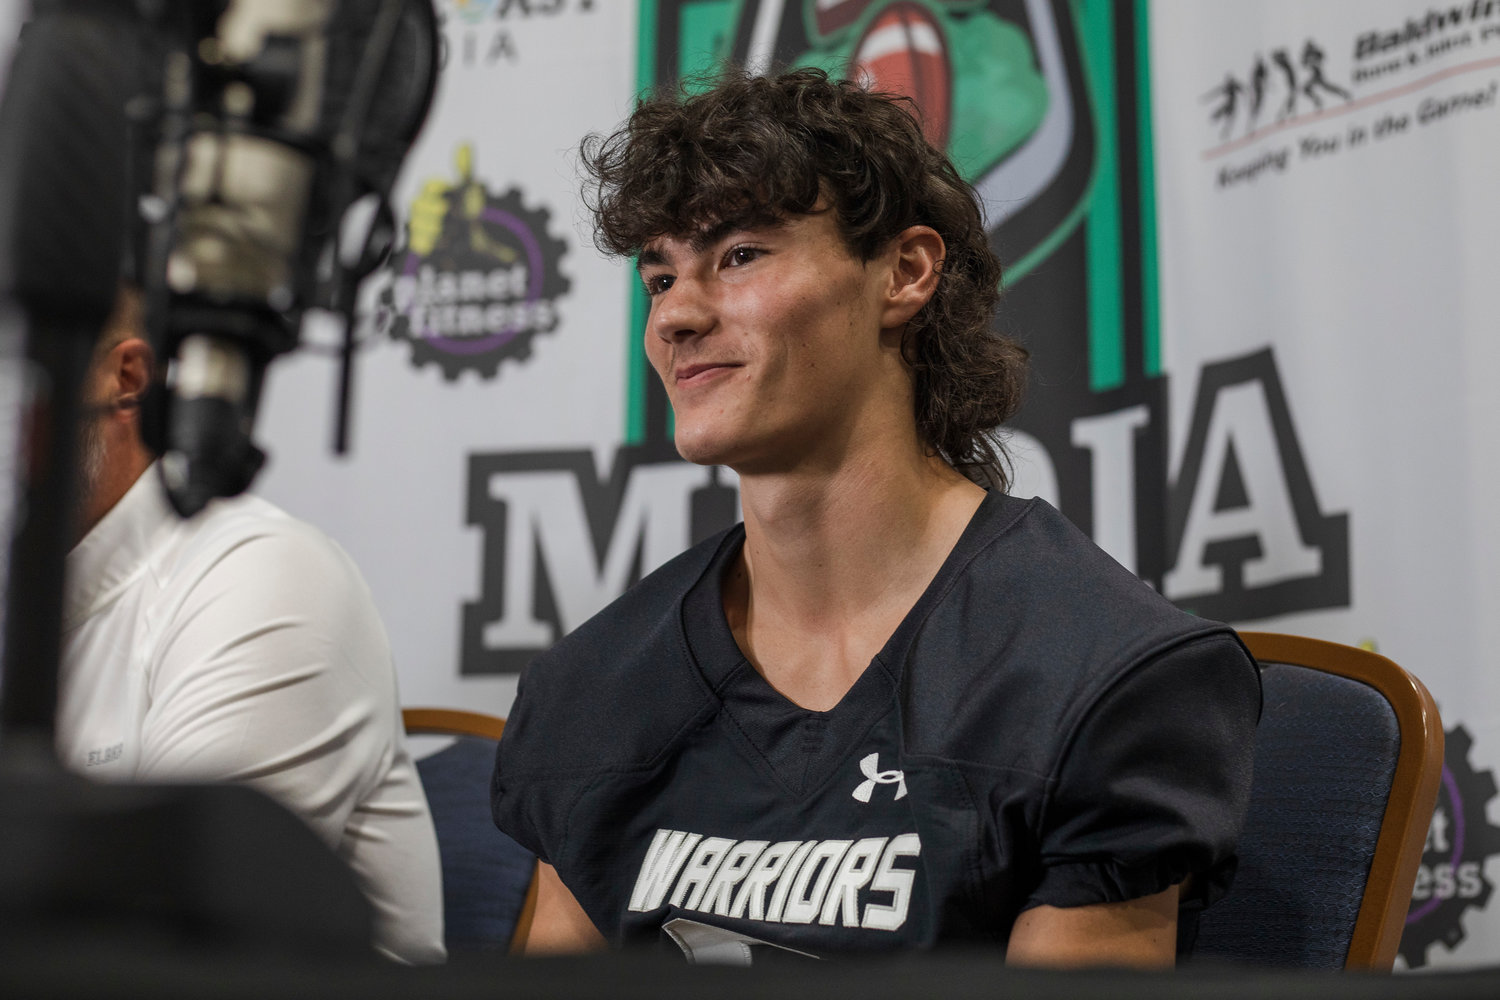 Quarterback Hunter Powers was among the Elberta Warriors’ representatives who answered questions during the first-ever Gulf Coast Media Day at the Orange Beach Event Center Aug. 16. This Thursday, Elberta returns home for the first time since its season-opening game.